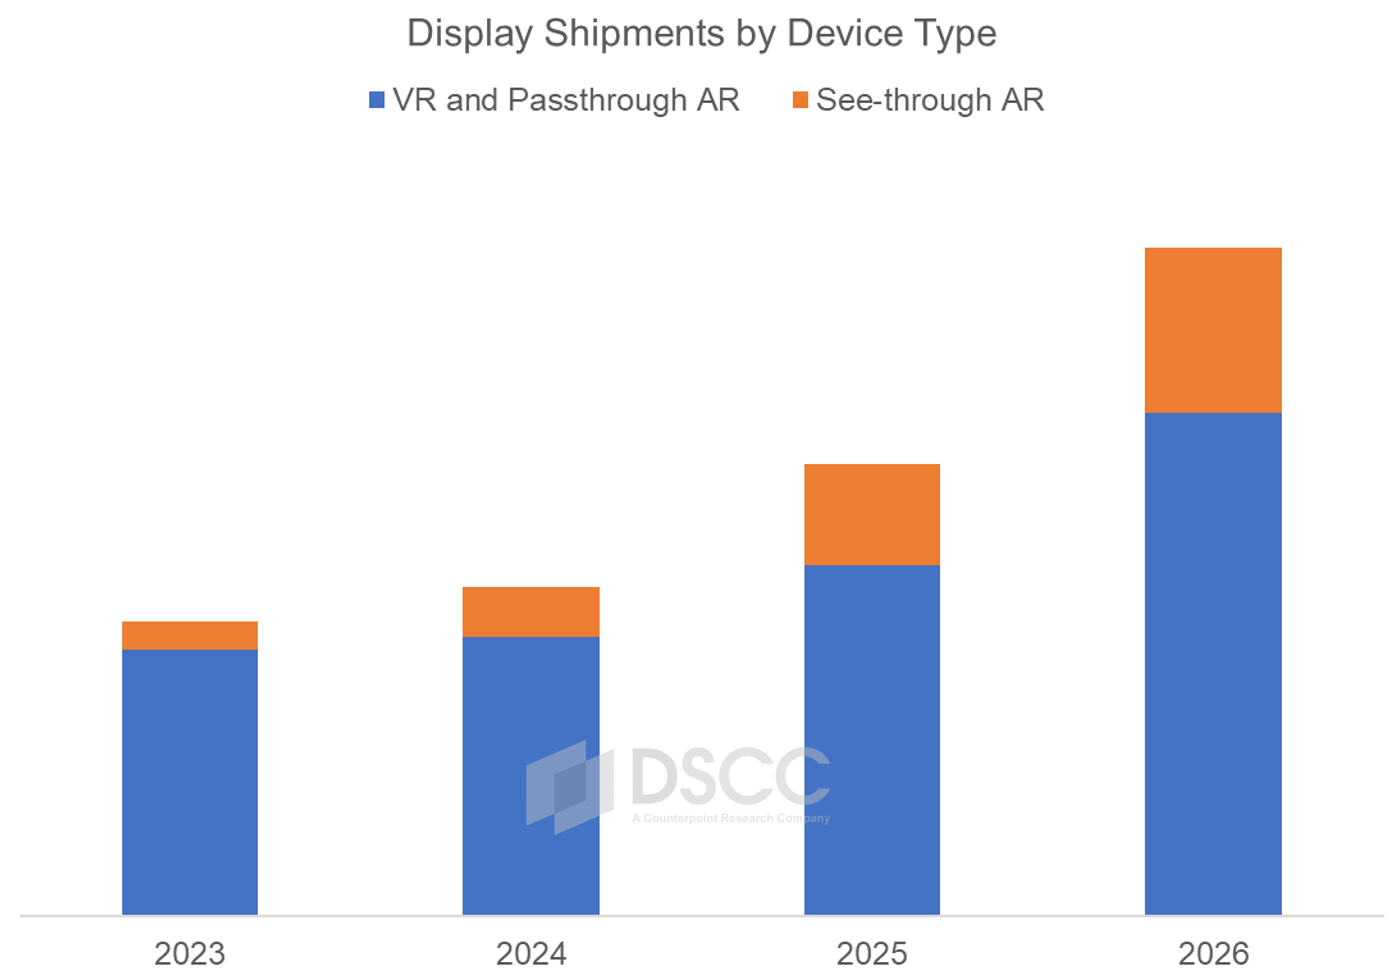 Display shipments by device type - VR and Passthrough AR, See-through AR - 2023-2026